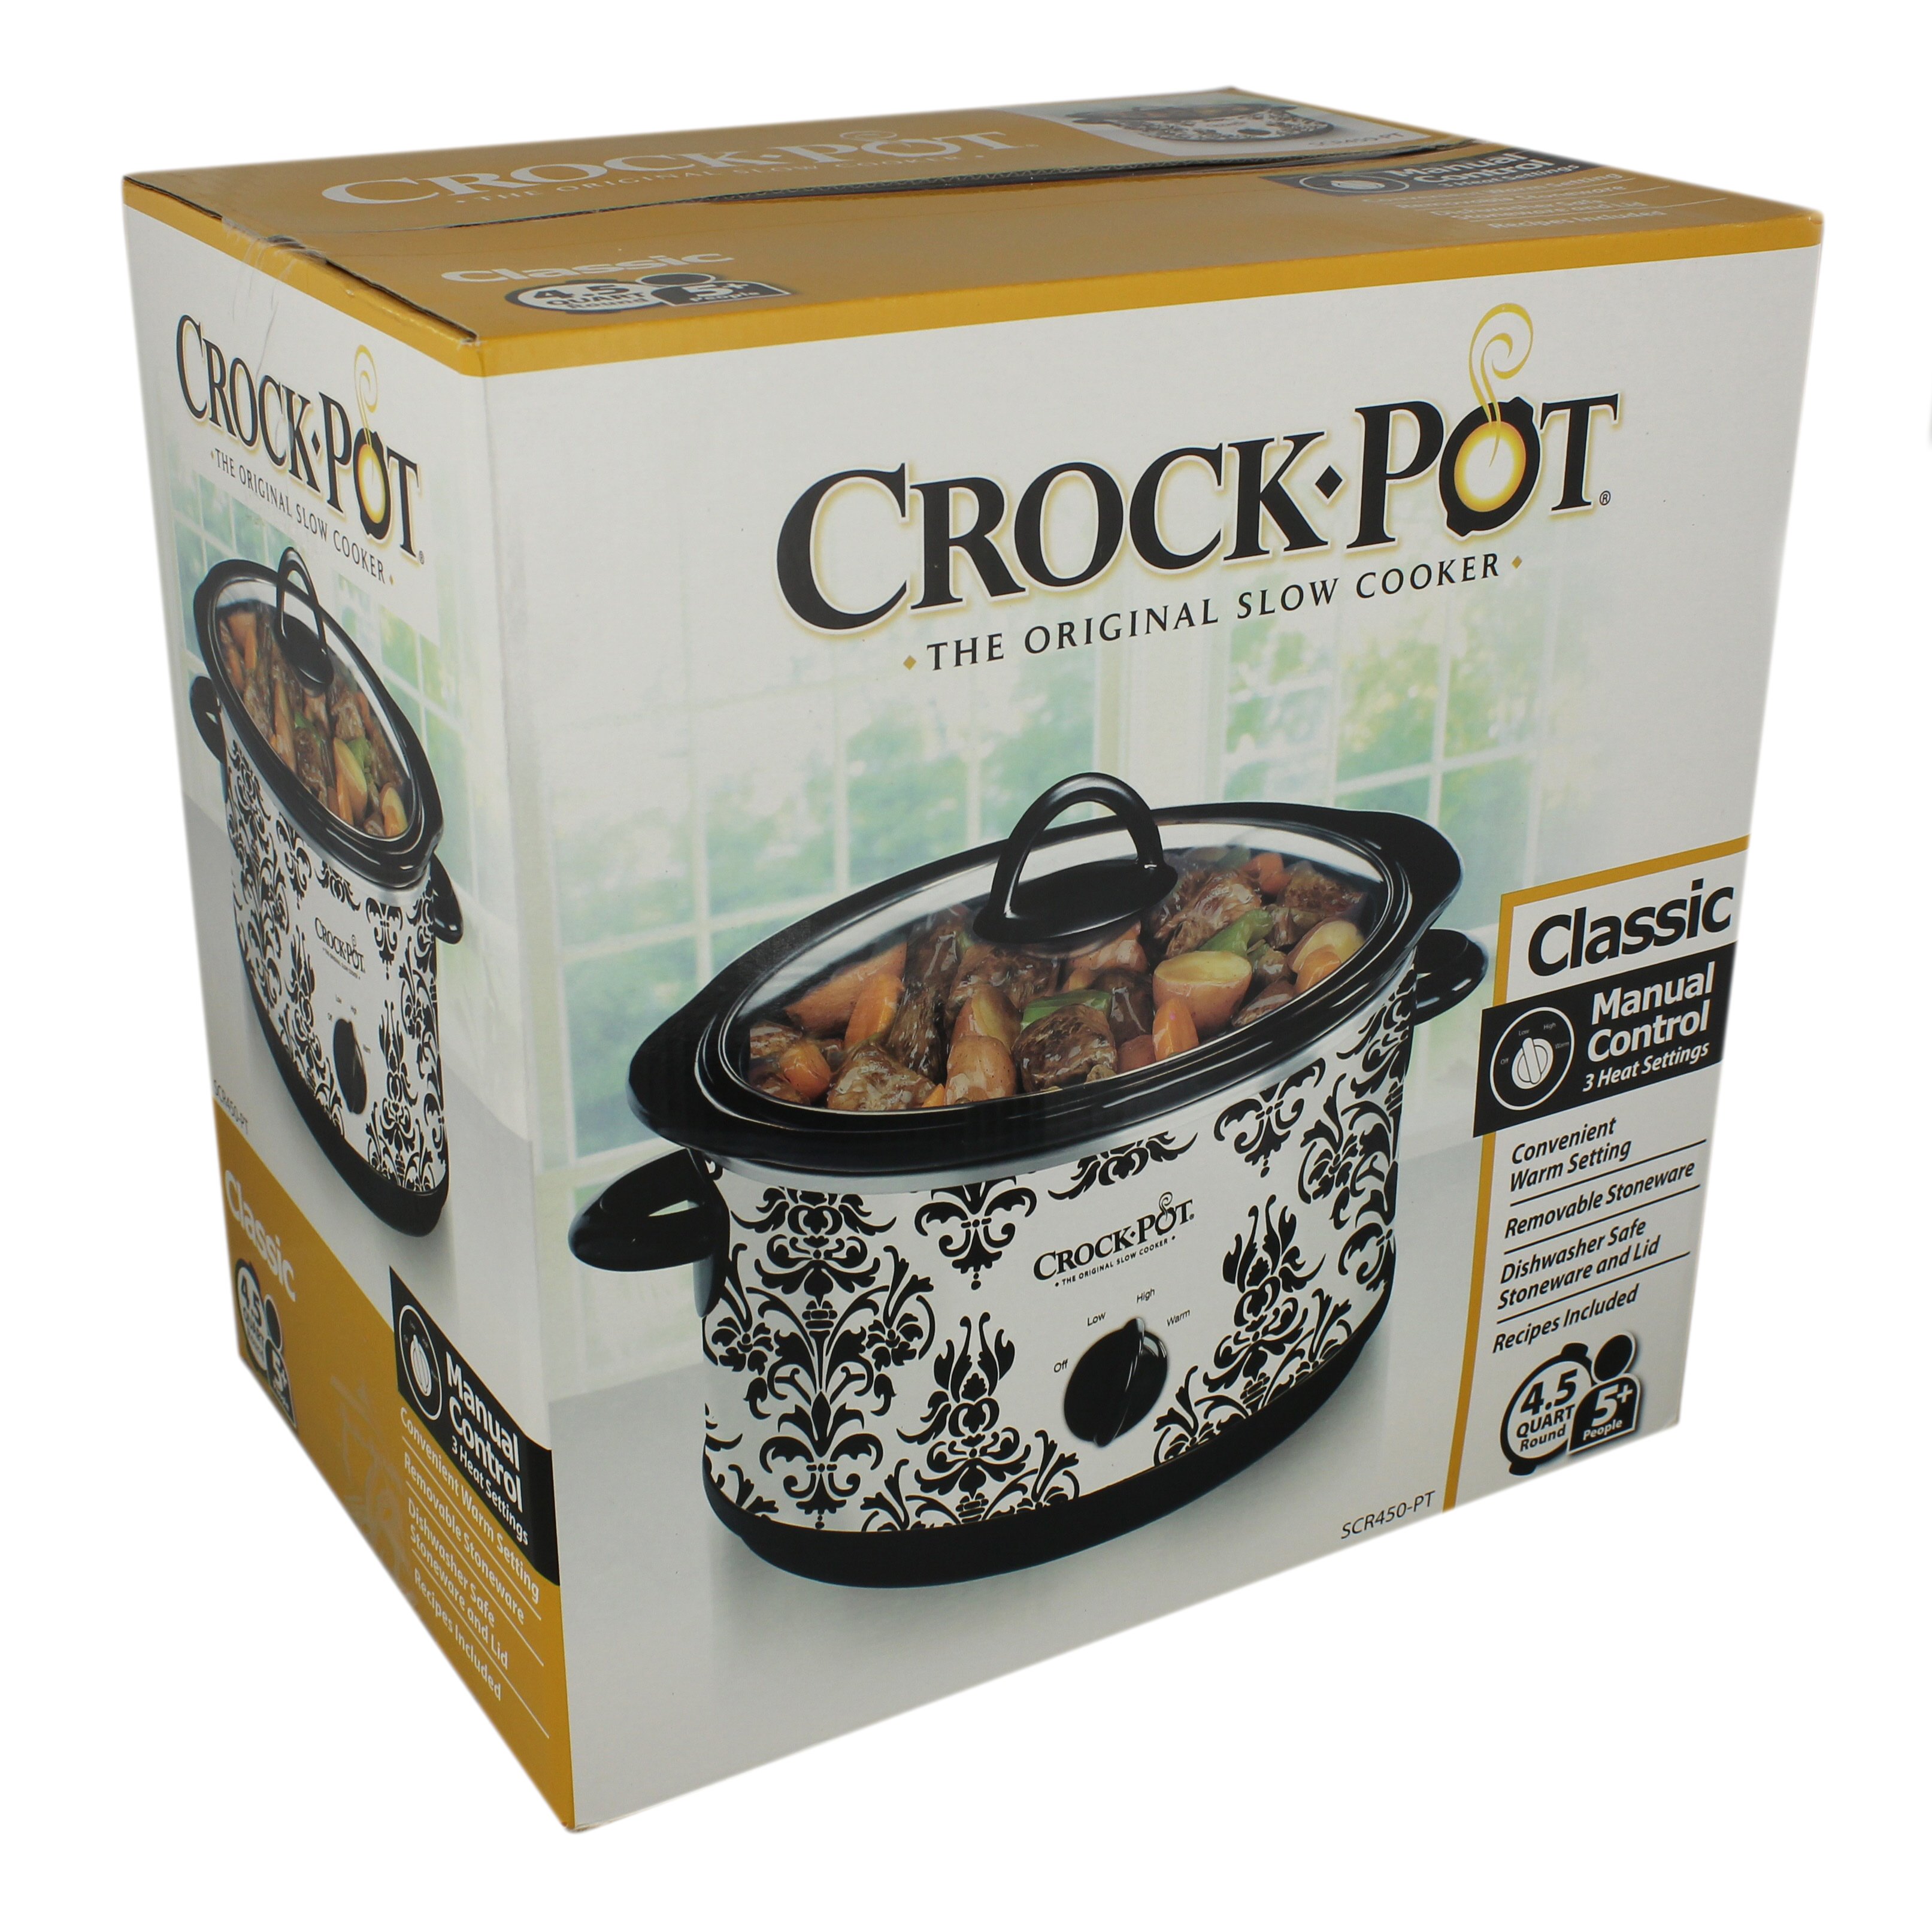 CROCK-POT 3040-BC Stainless Steel 4-Quart Round-Shaped Manual Slow